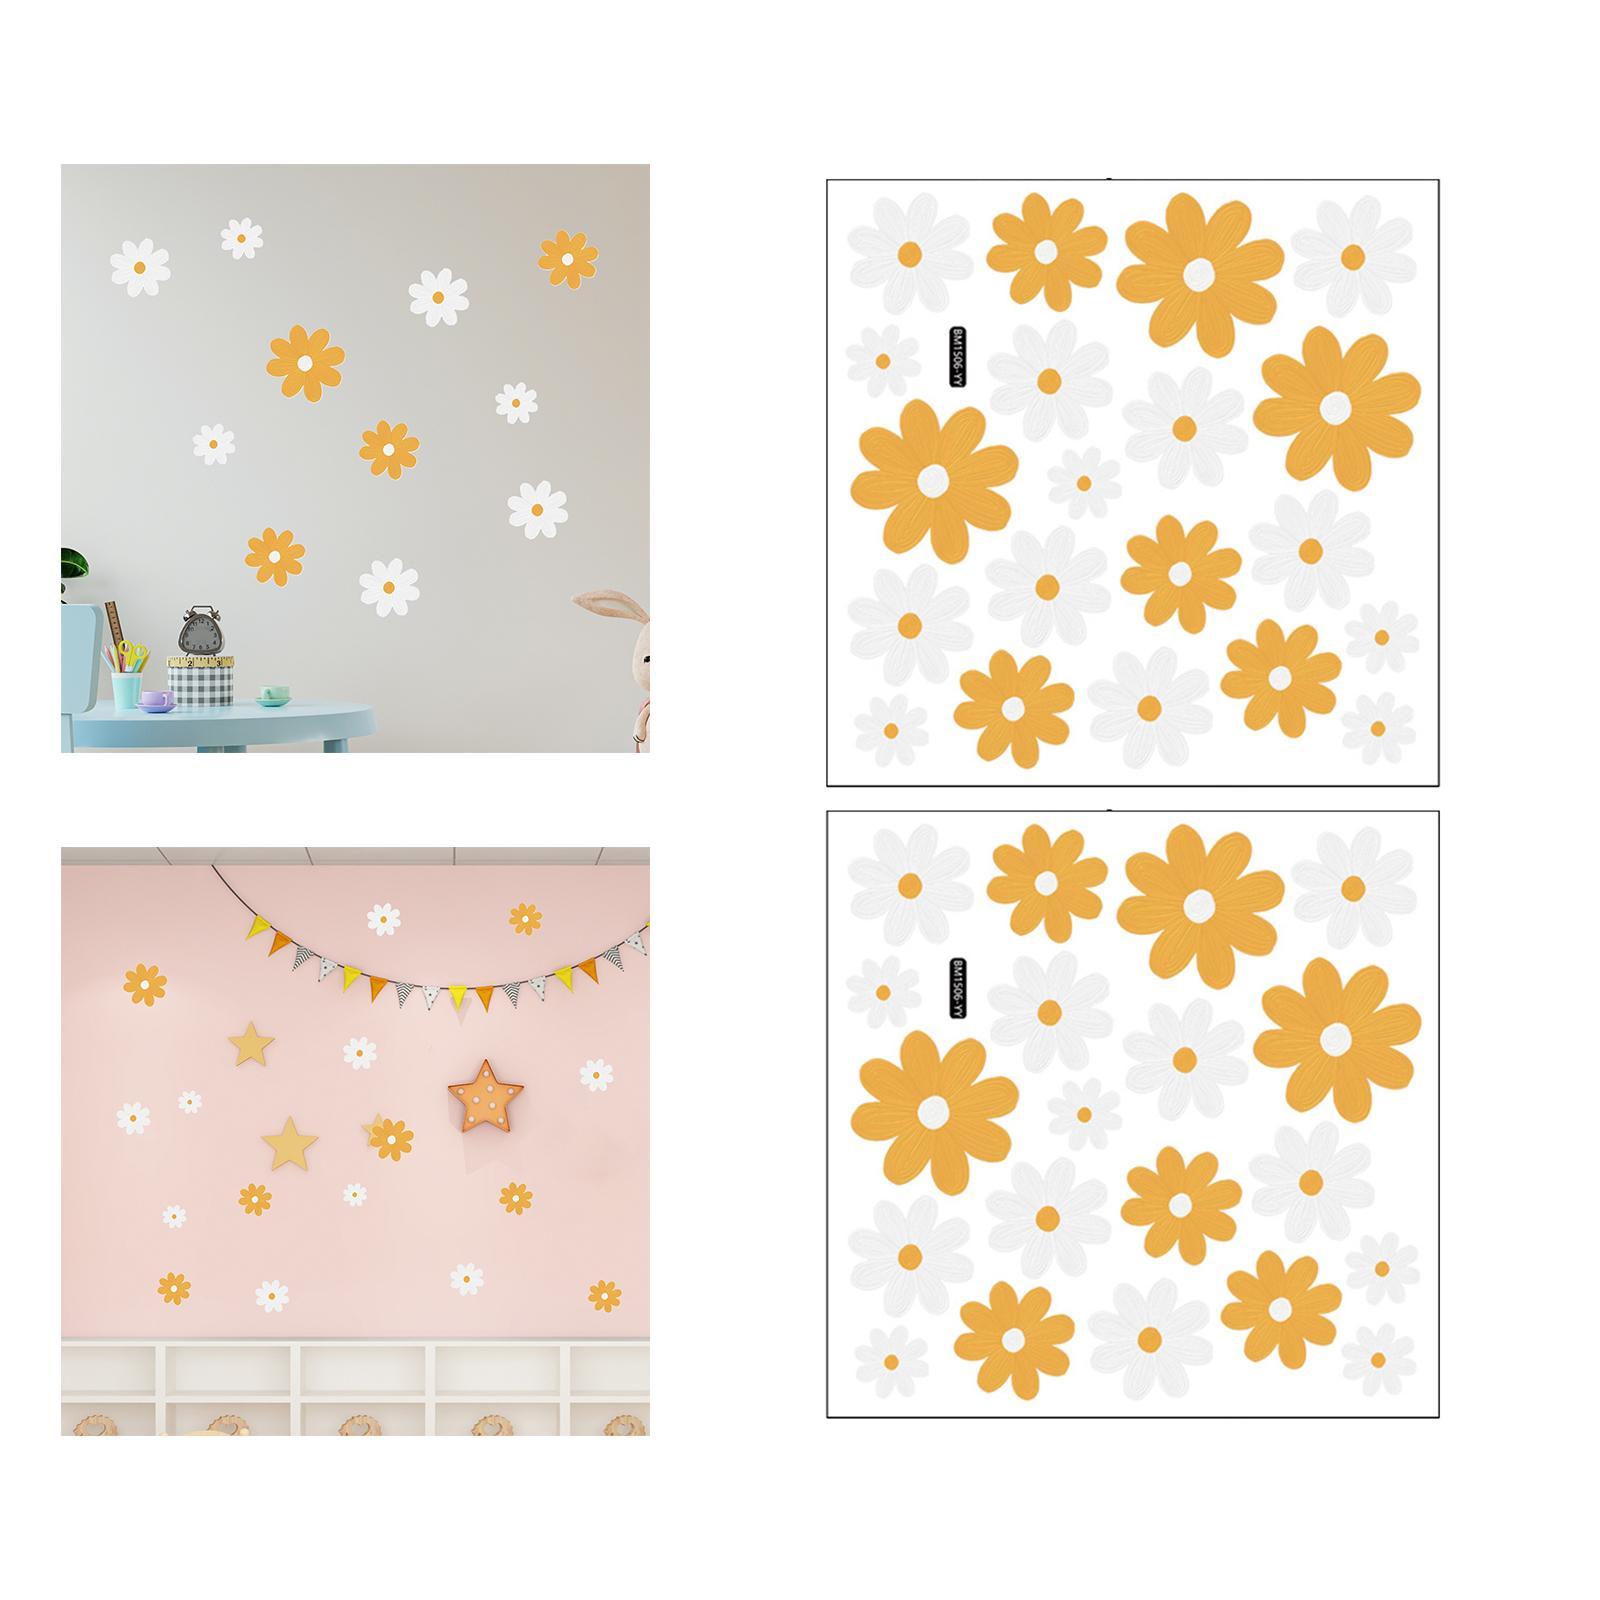 Daisy Floral Wall Stickers Vinyl Mural Art DIY Wallpaper Peel and Daisy Decals Wall Decals for Bedroom Kids Nursery Playroom Decor